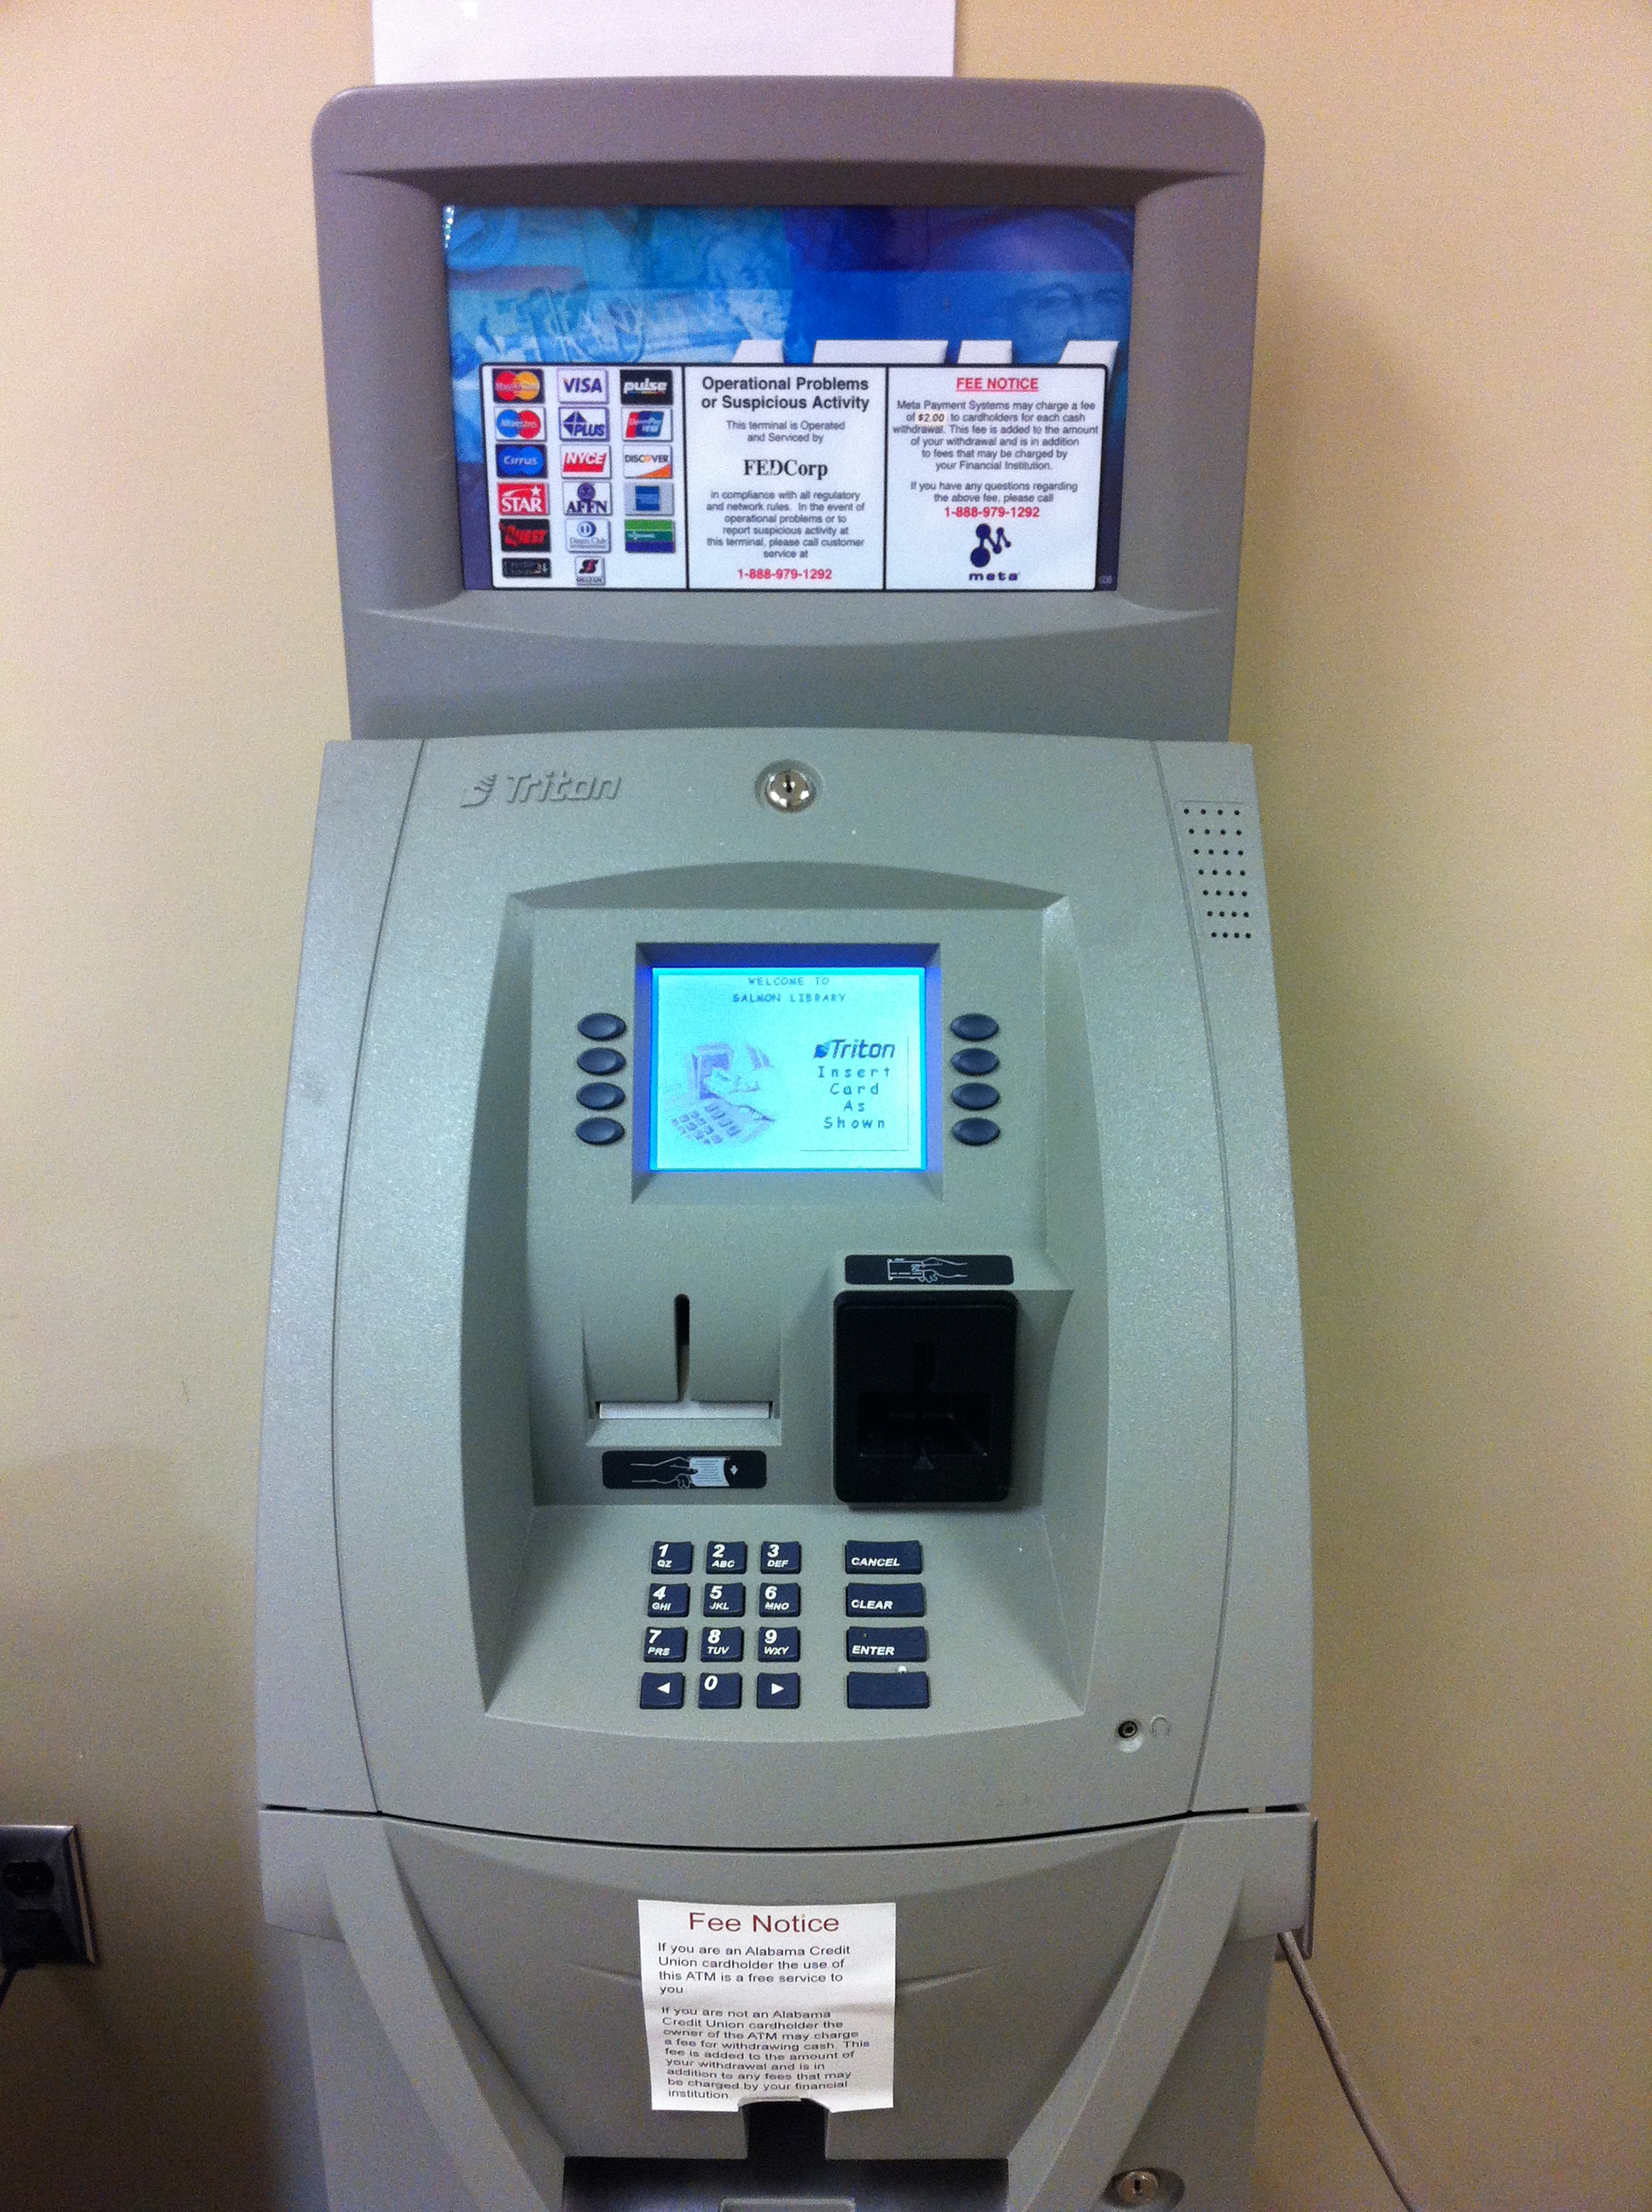 new-atm-machine-in-salmon-library-uah-library-blog